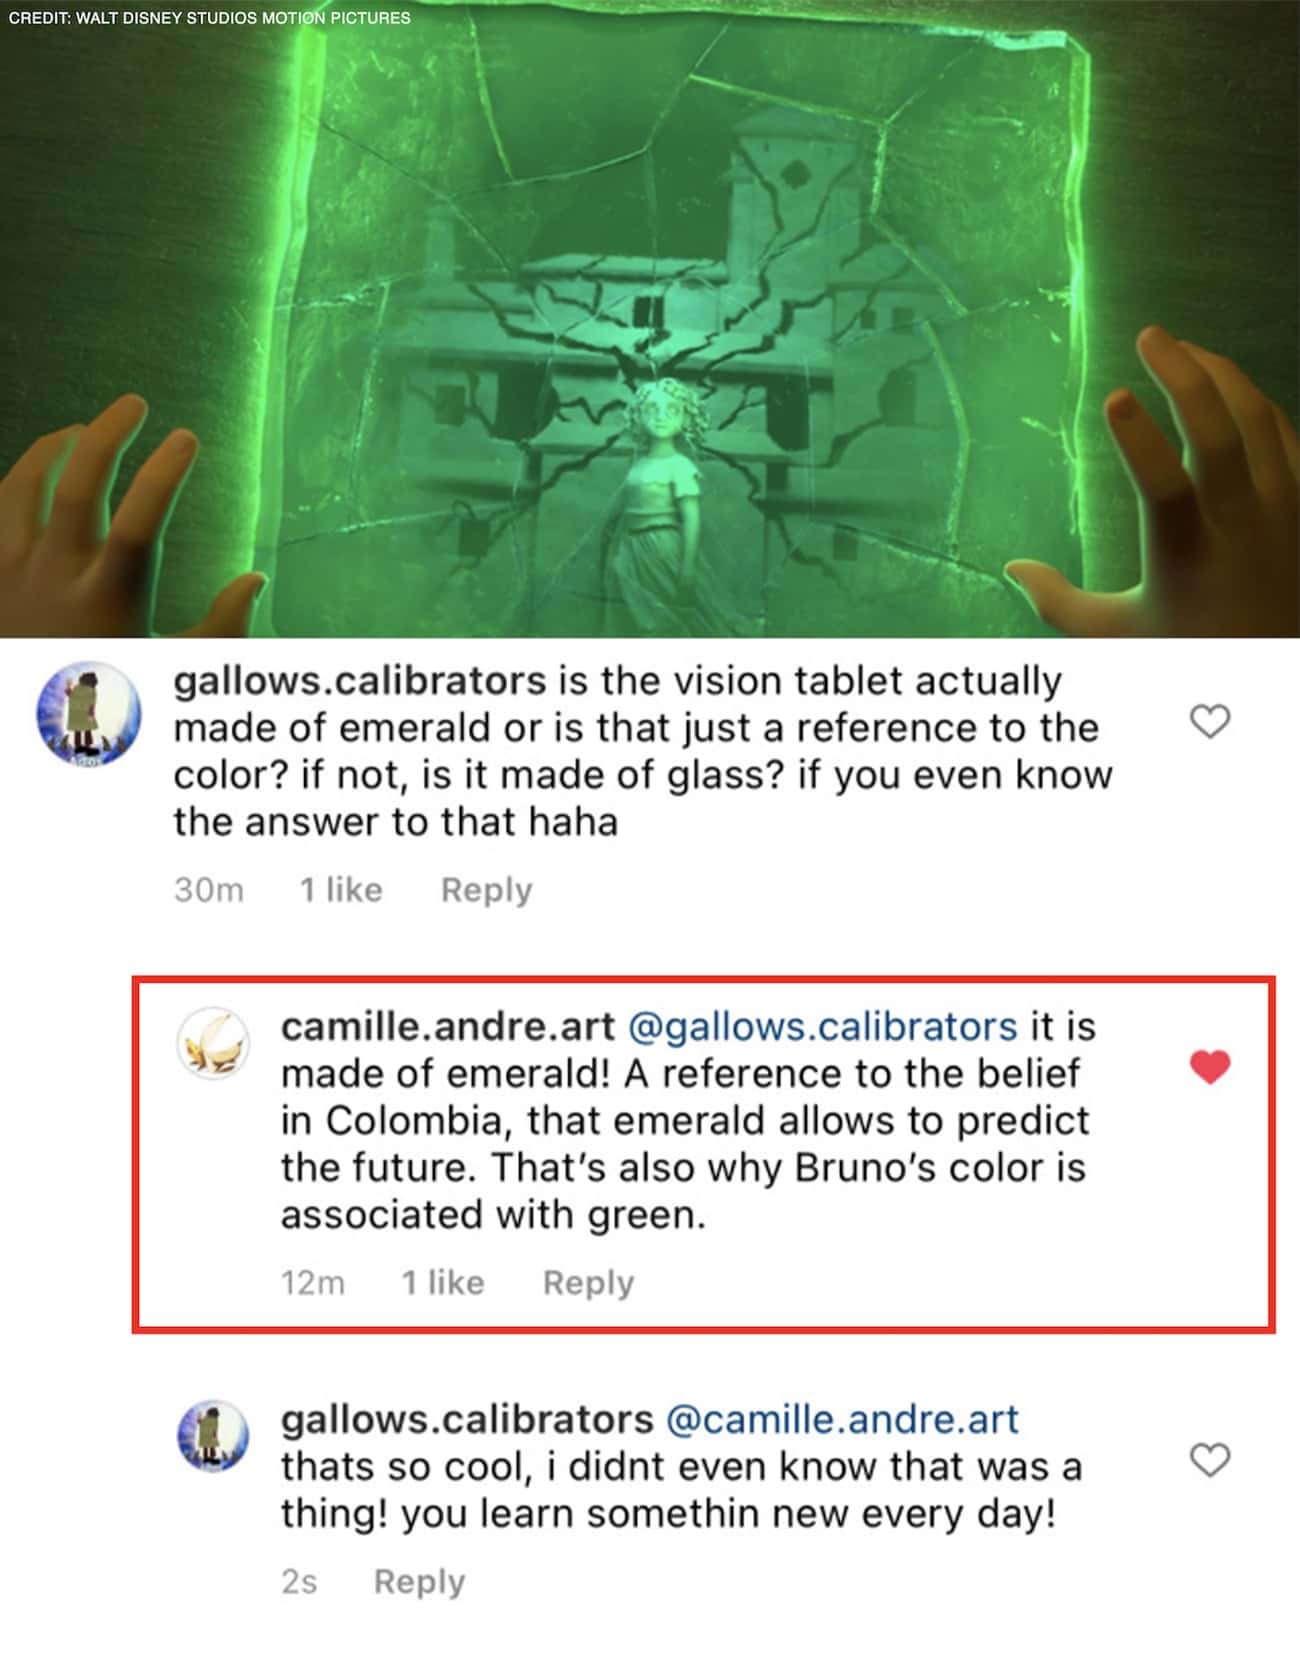 Bruno's Vision Tablets Are Made Of Emerald